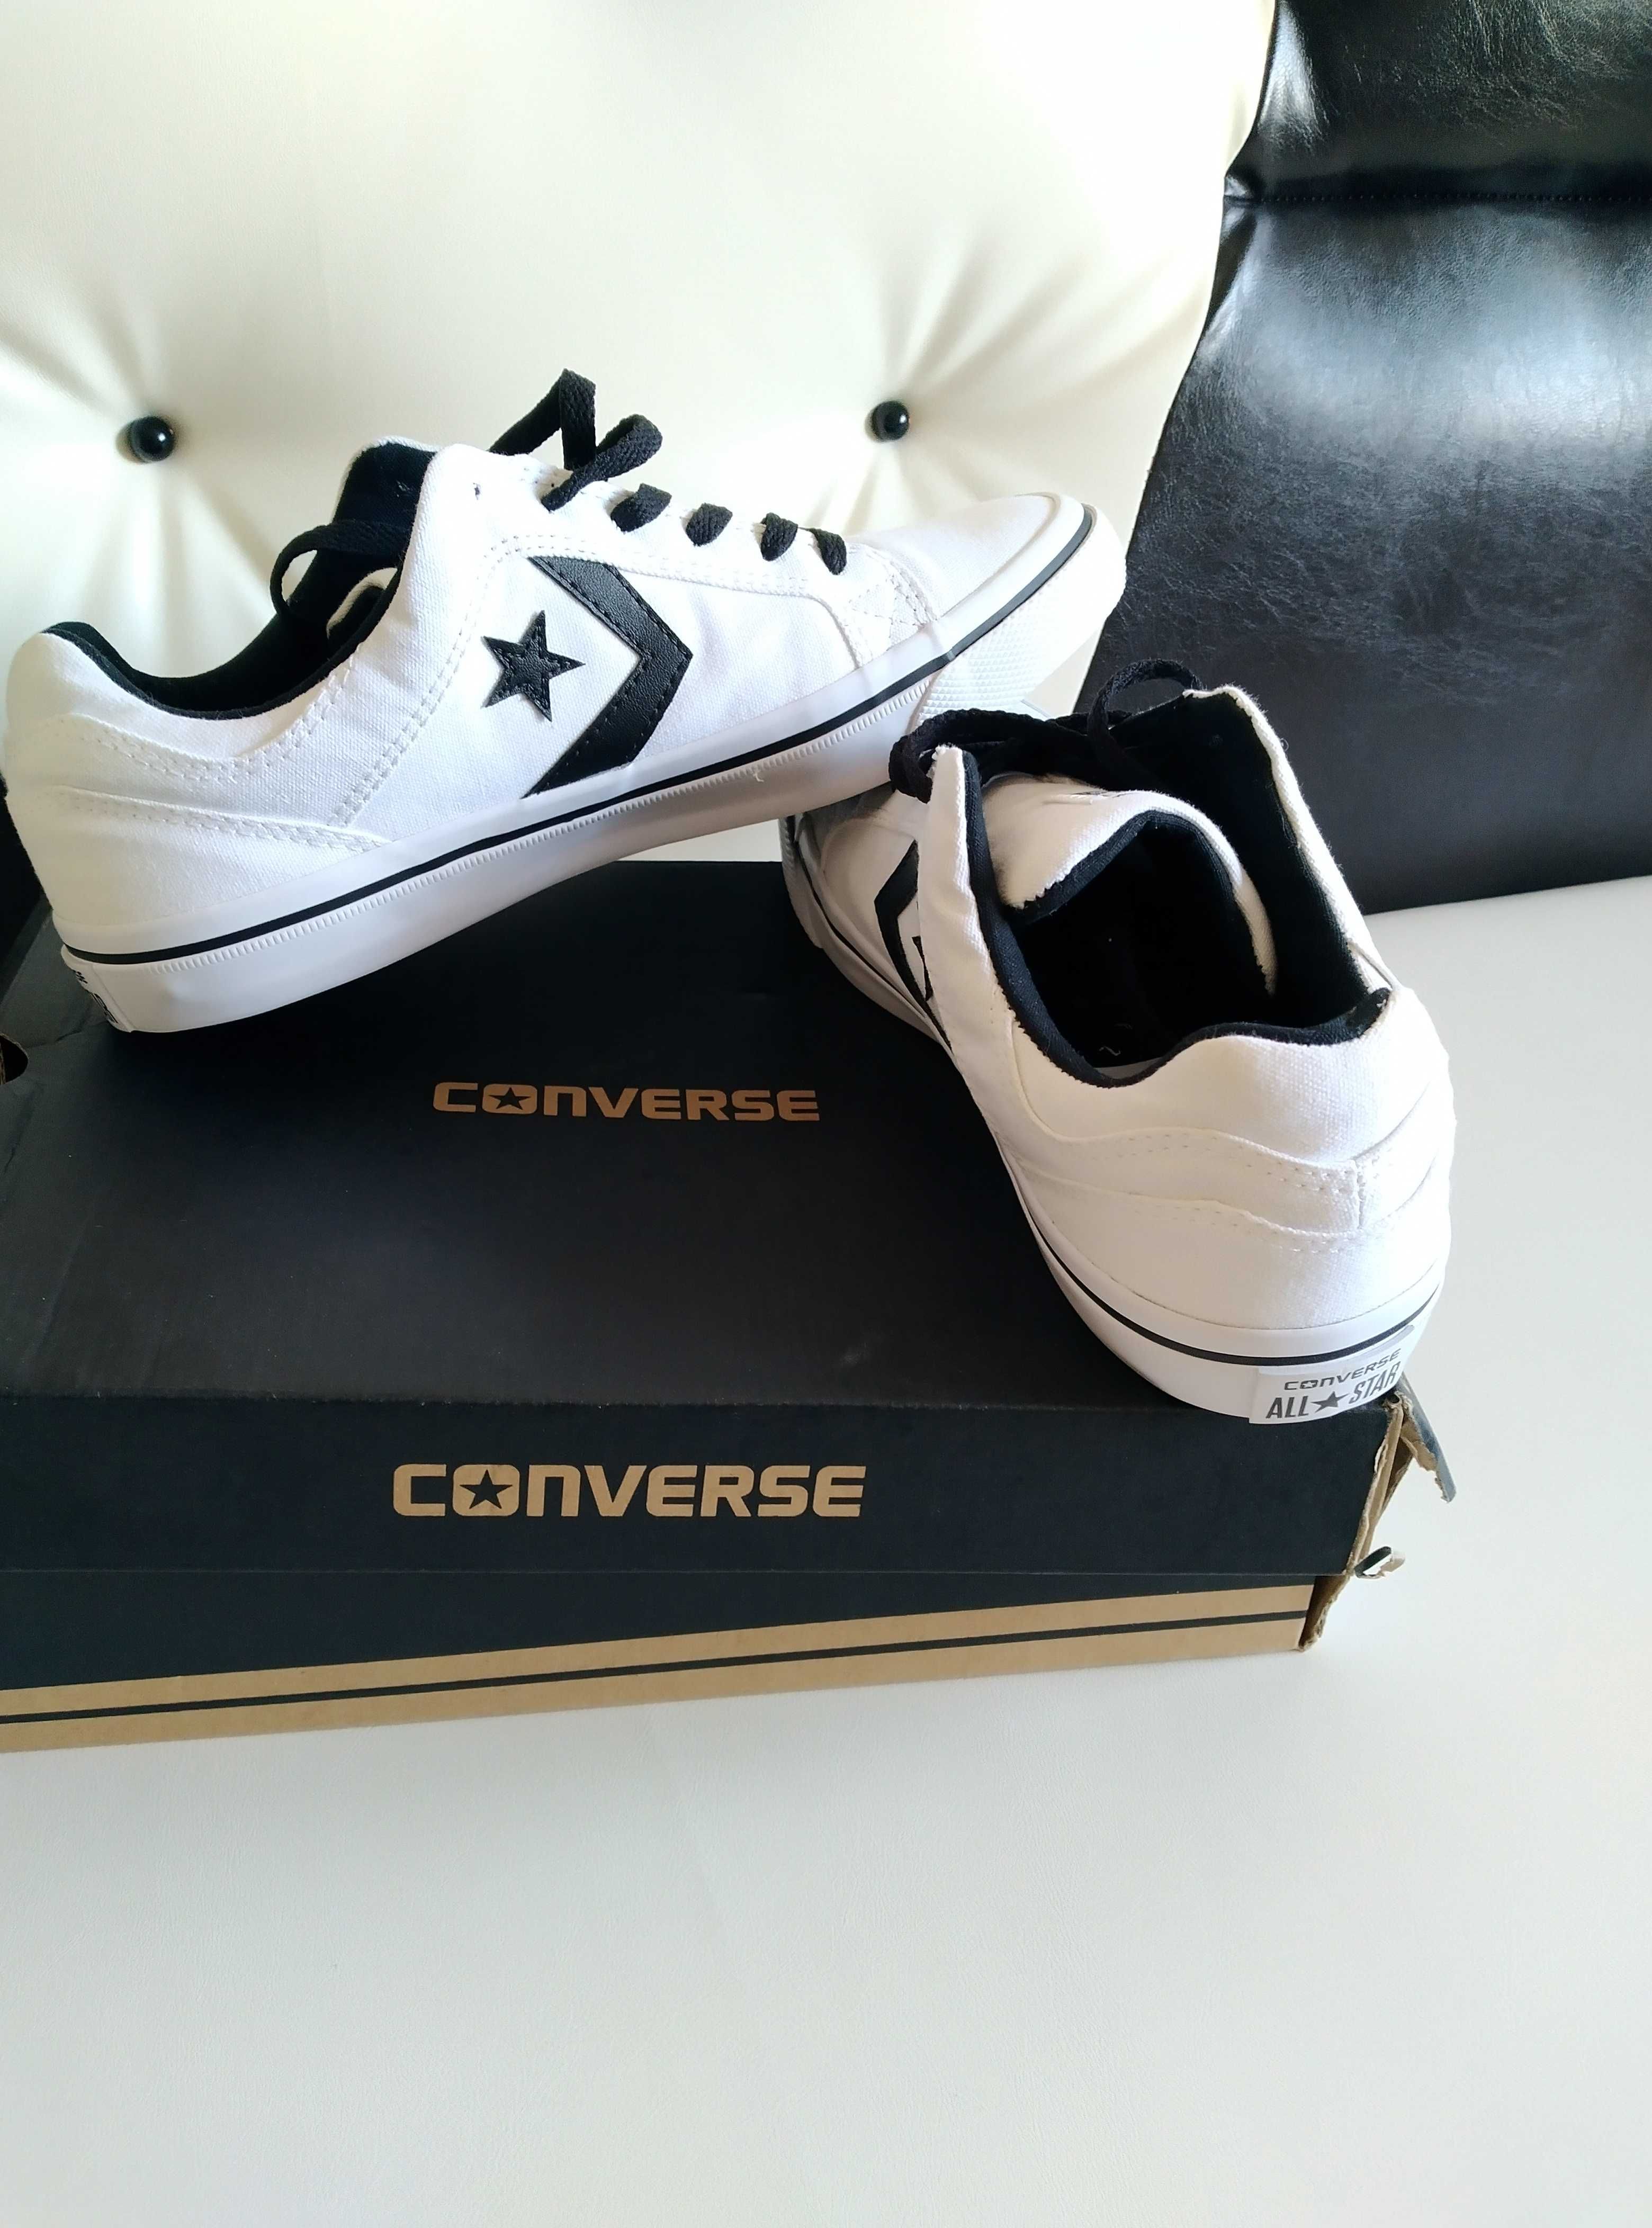 Converse,Replay,Levi's sneakers